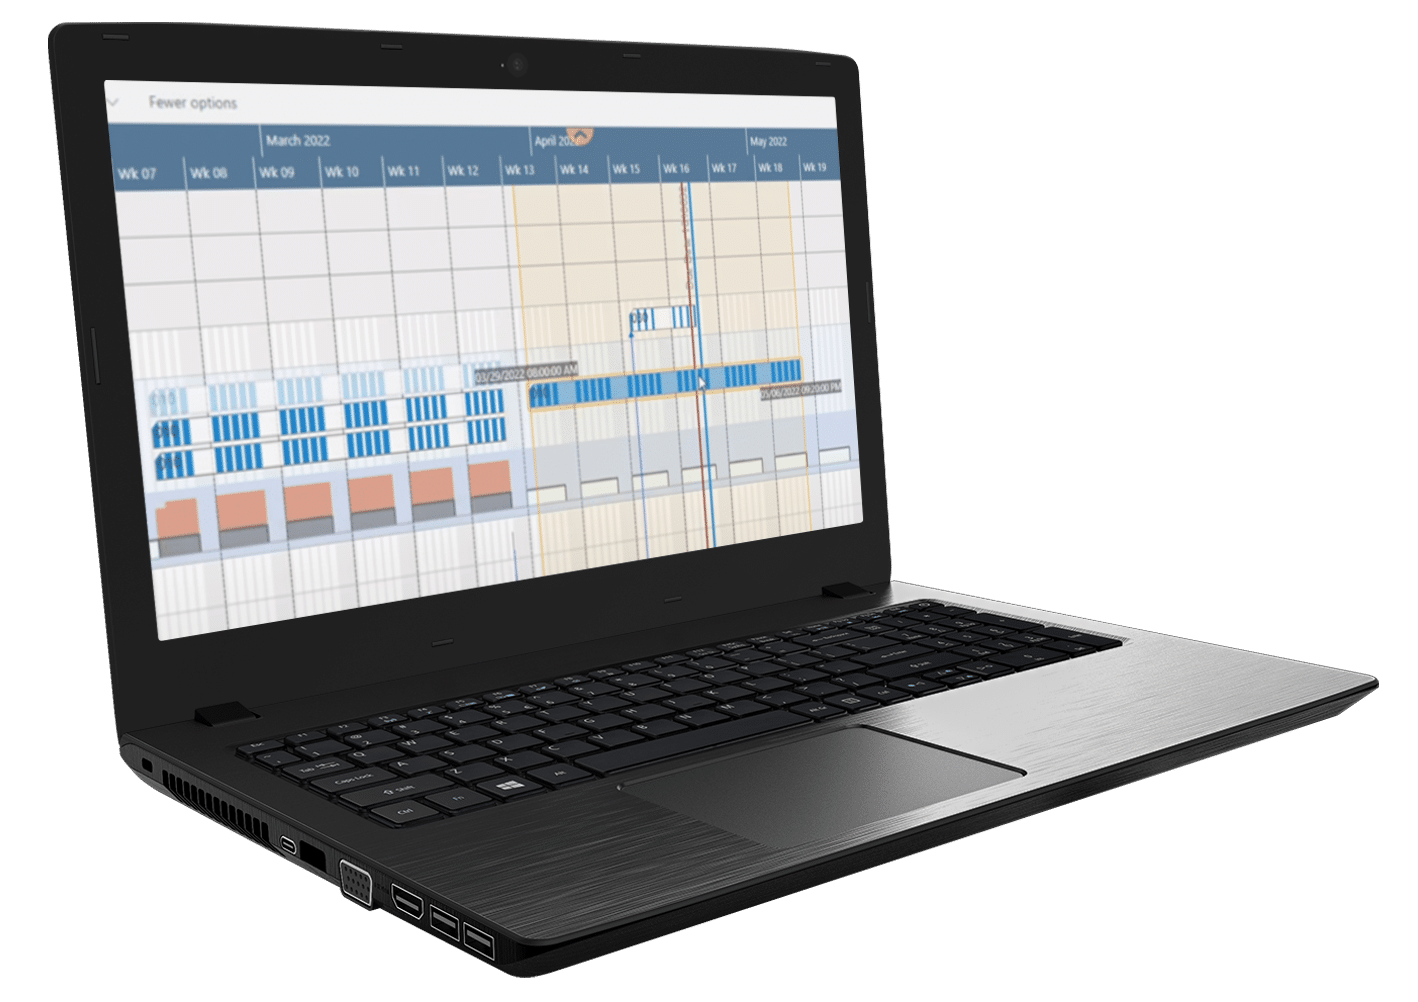 Microsoft Dynamics 365 Software for Operations on a laptop